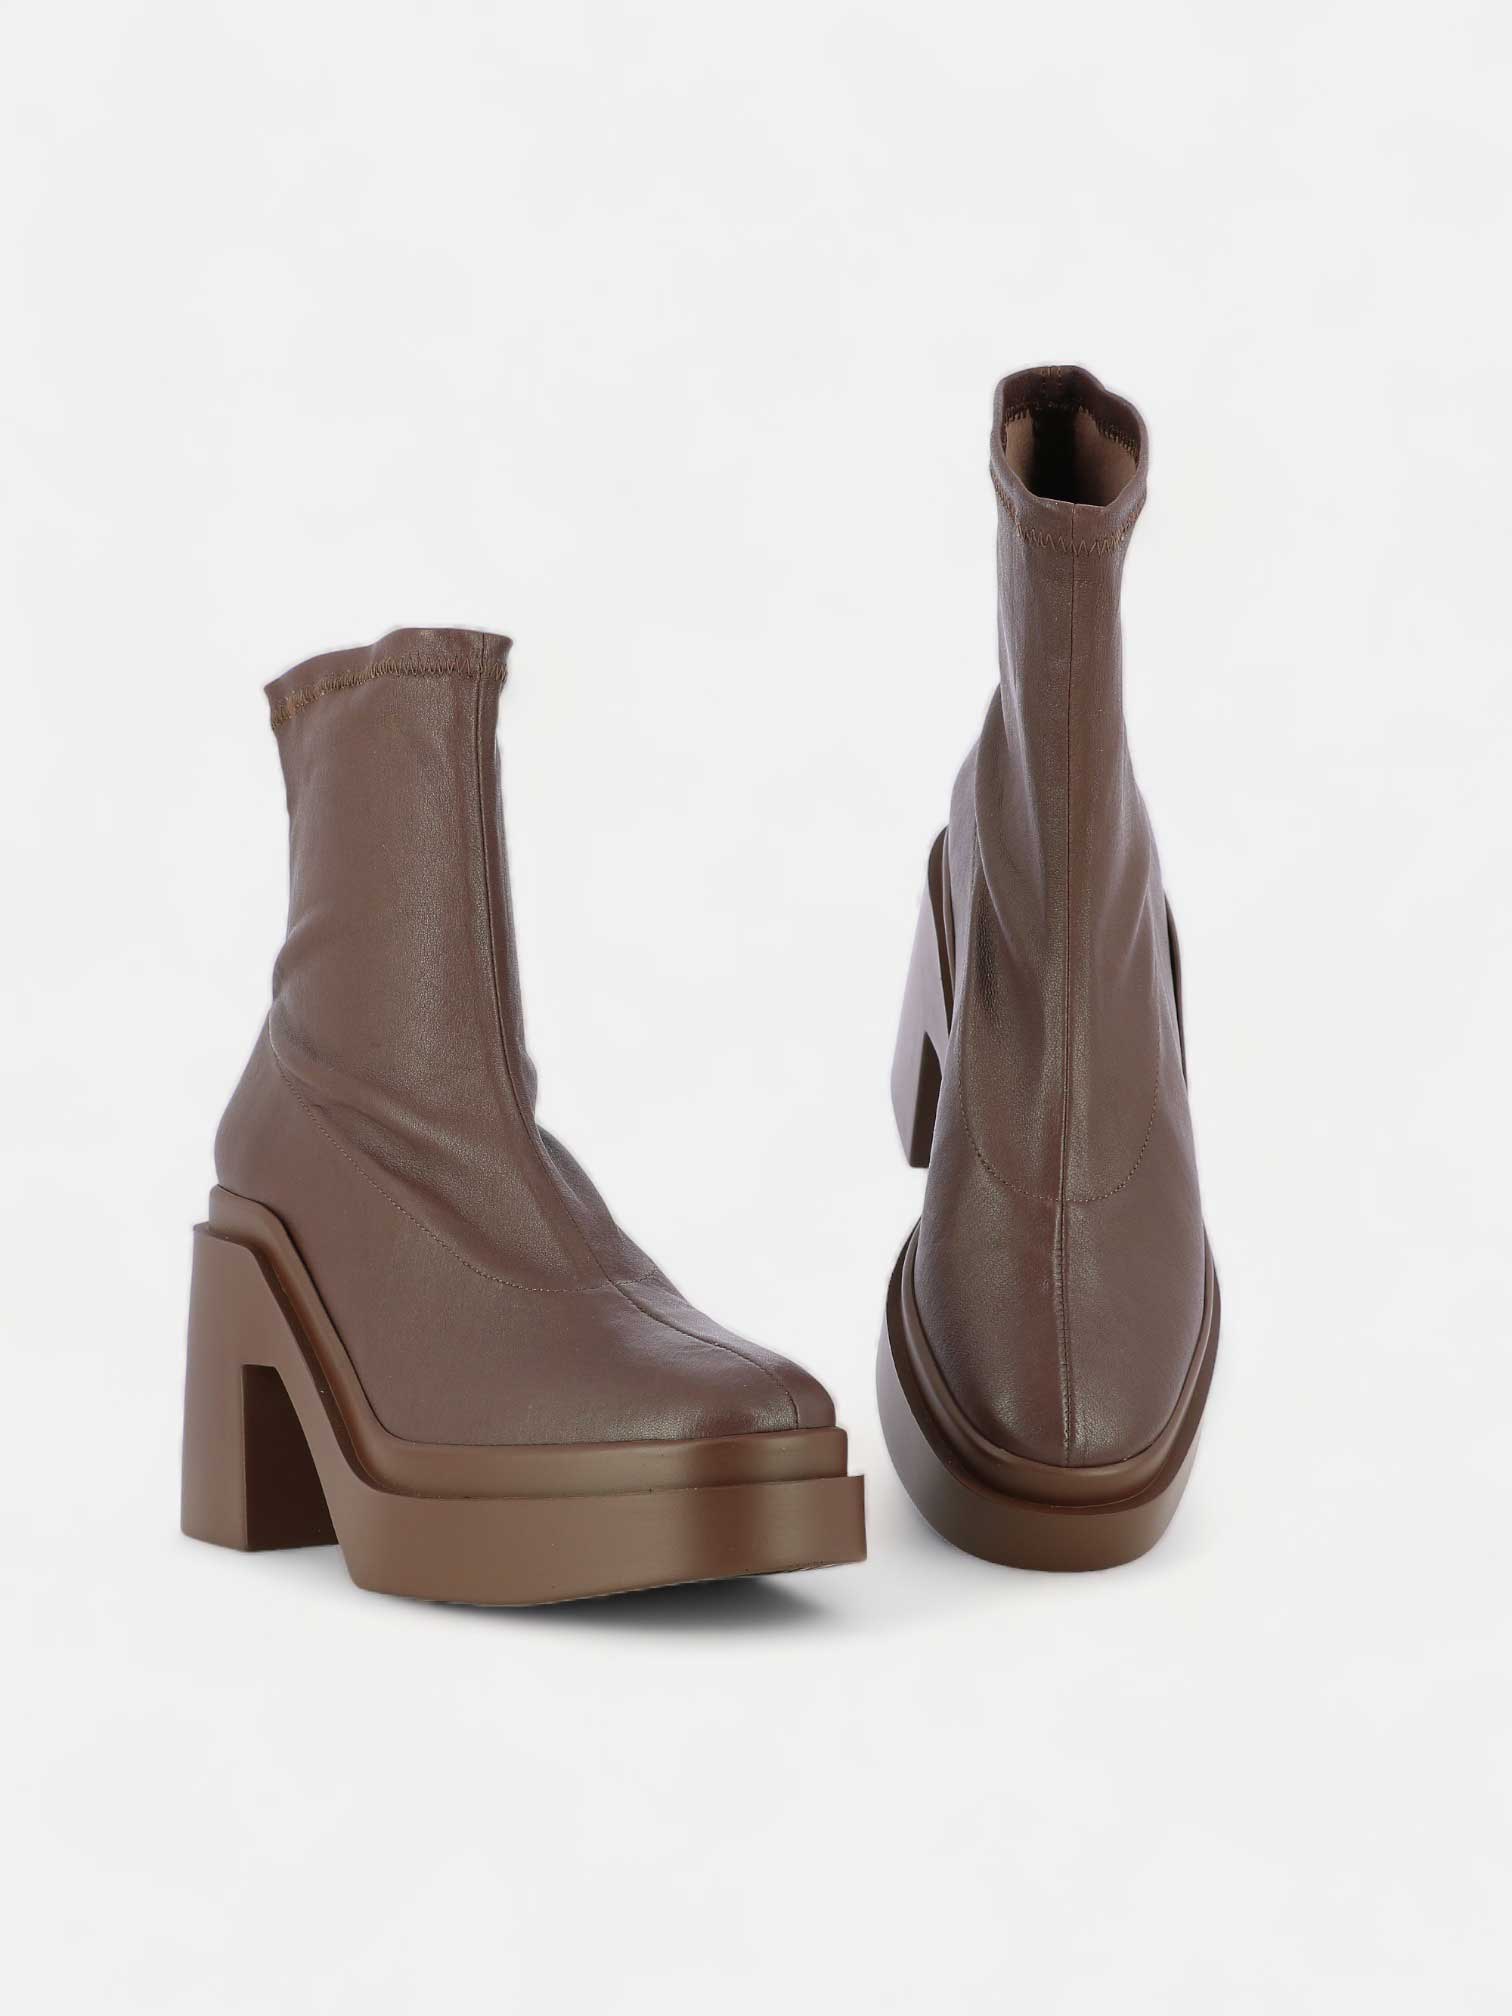 ANKLE BOOTS - NINA ankle boots, leather dark brown - 3606063904759 - Clergerie Paris - Europe